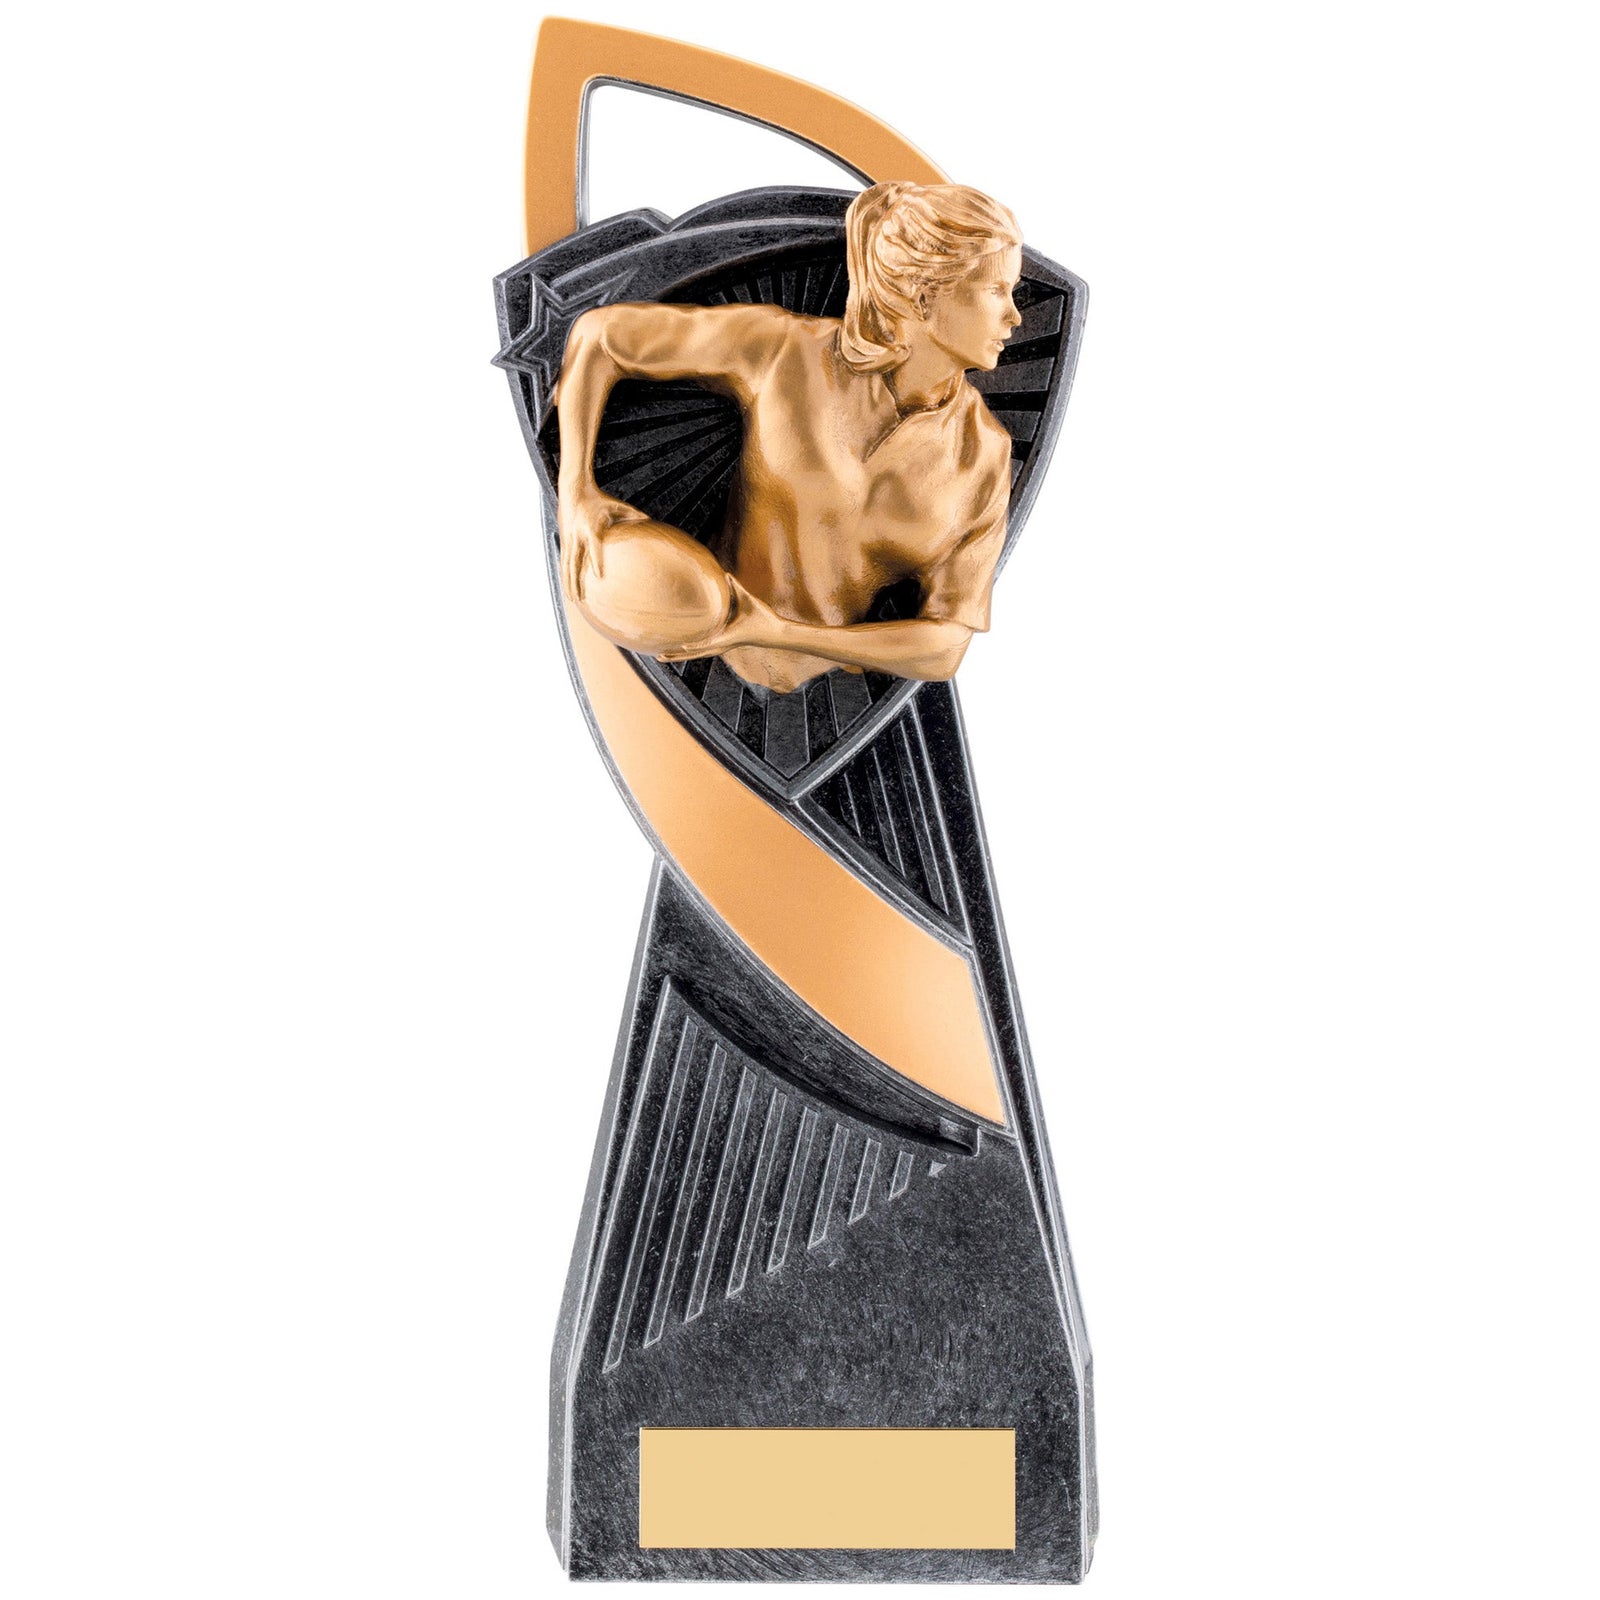 Utopia Female Rugby Trophy (Gold/Silver)